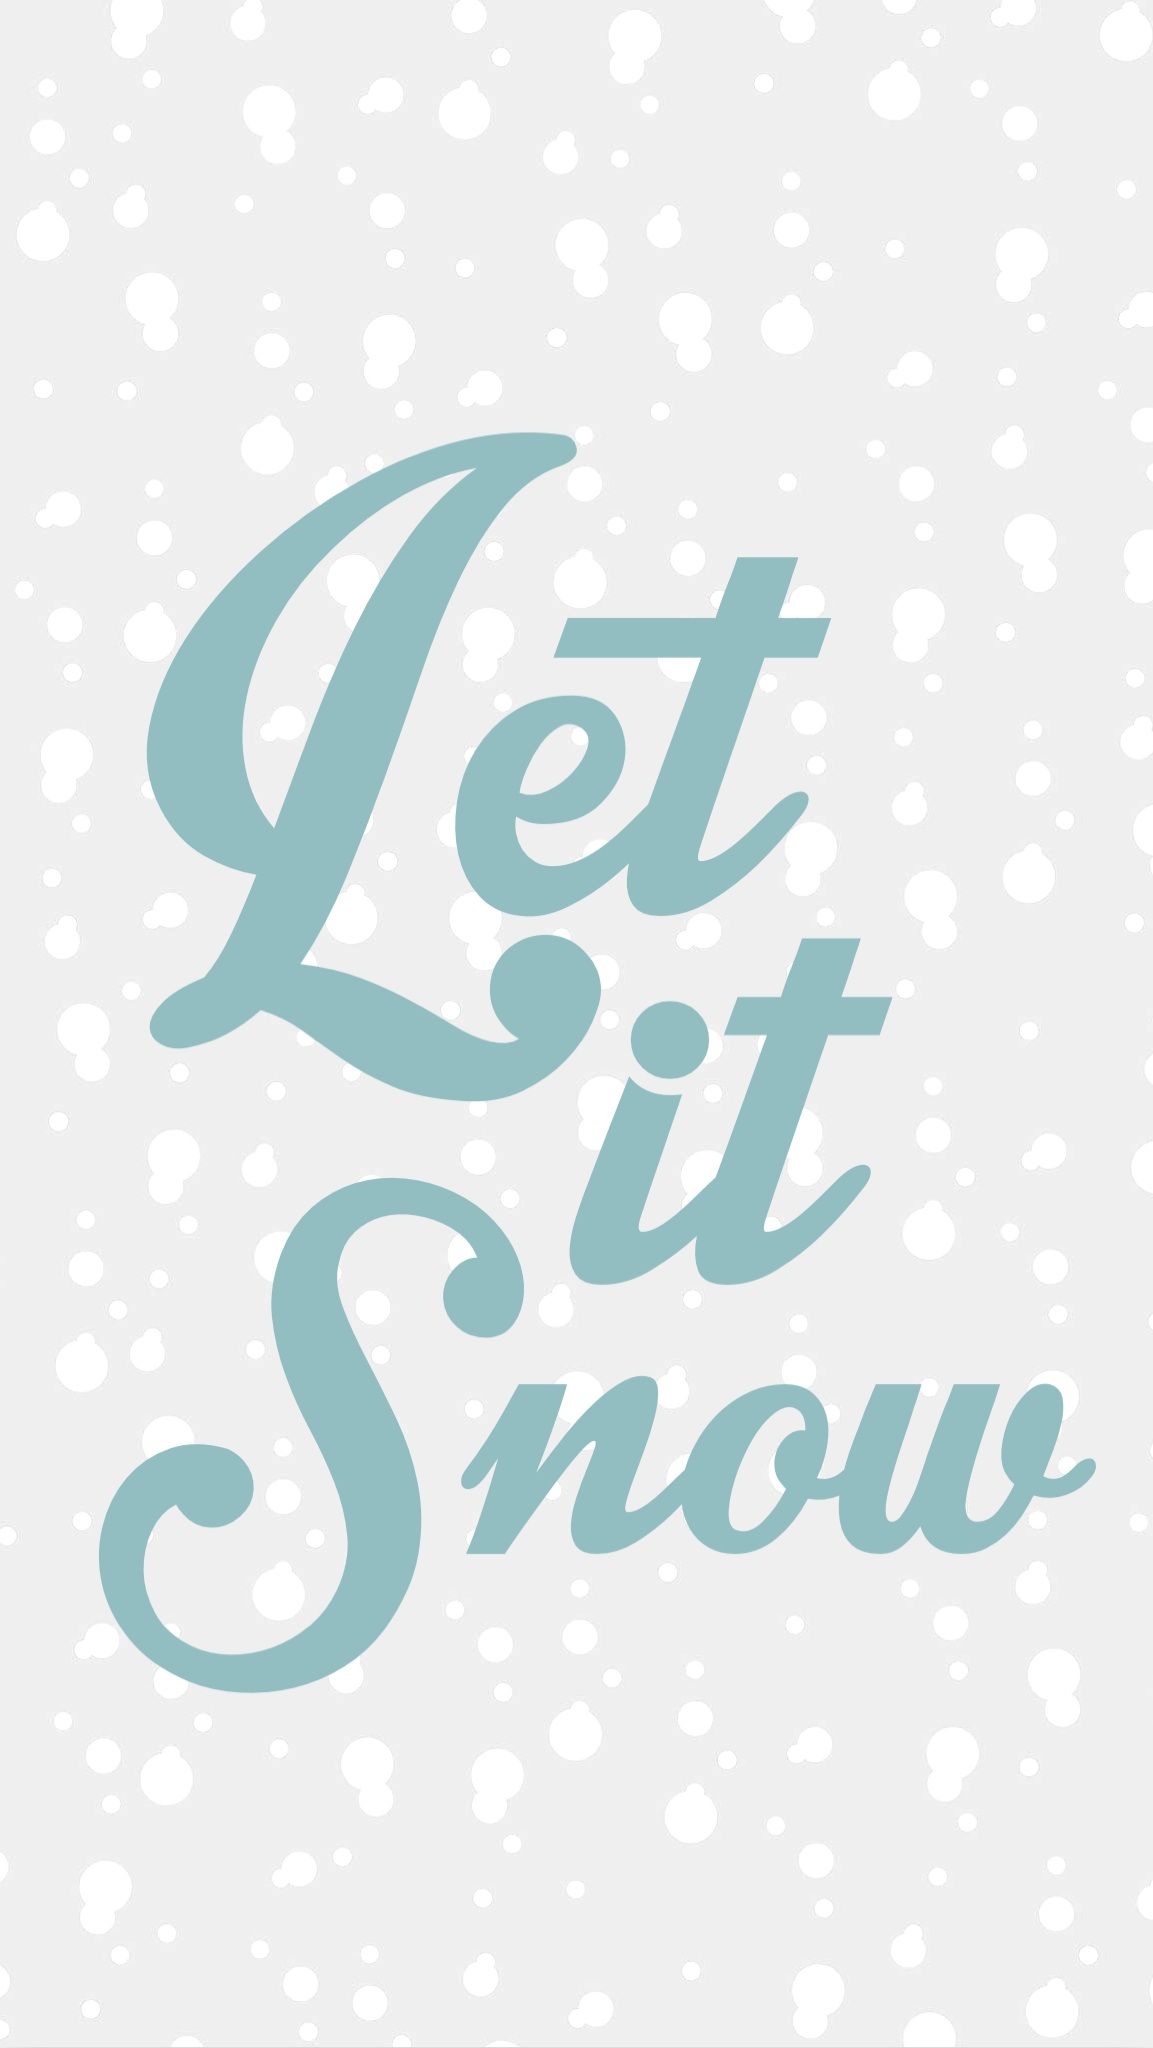 Free Phone Wallpaper} Let It Snow and Me. Winter wallpaper, Christmas wallpaper, Wallpaper iphone christmas